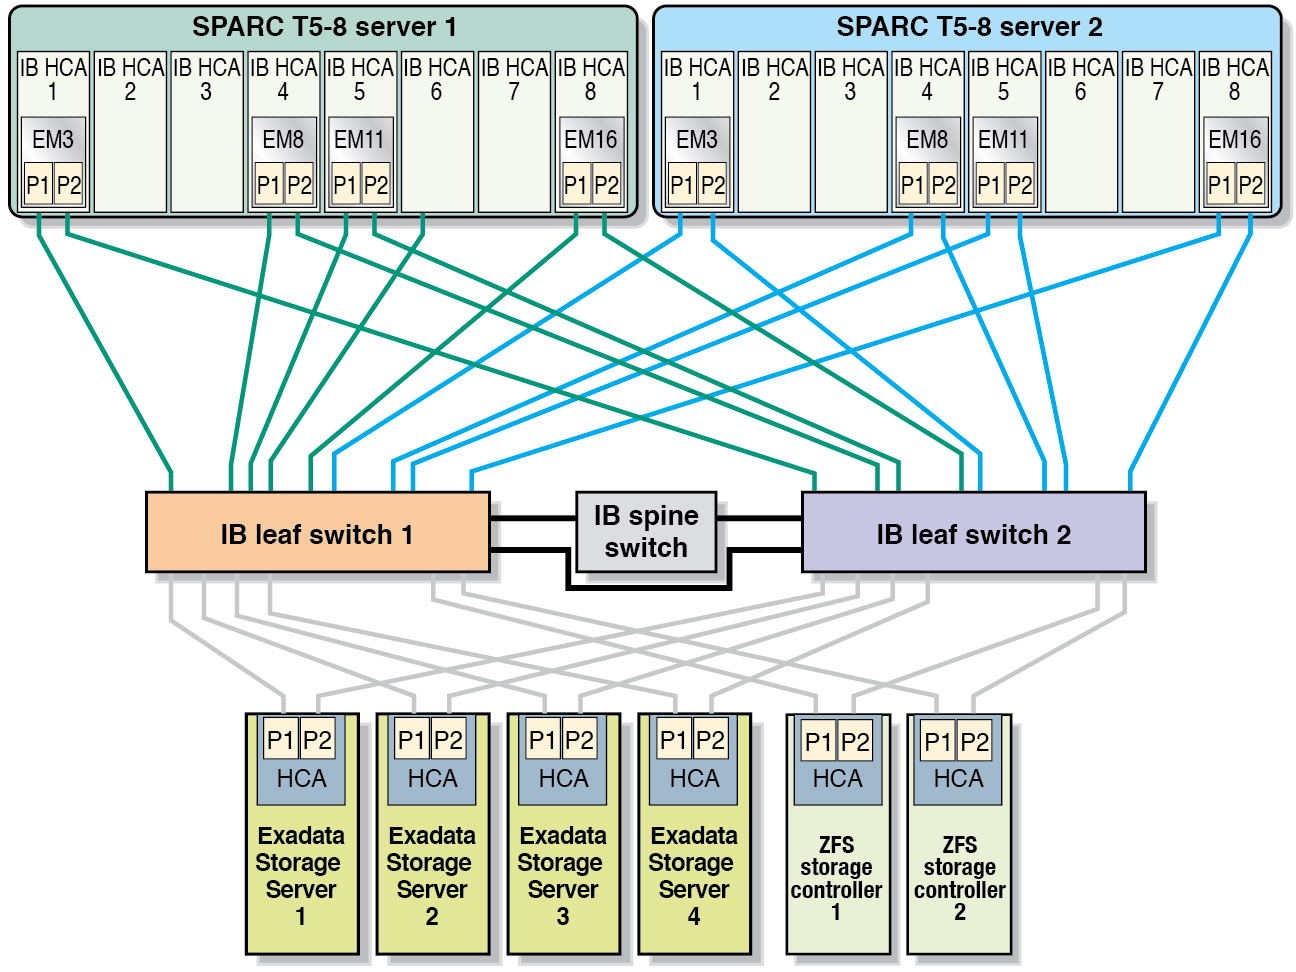 image:Graphic showing the InfiniBand connections for the SPARC T5-8 servers in a Half Rack.